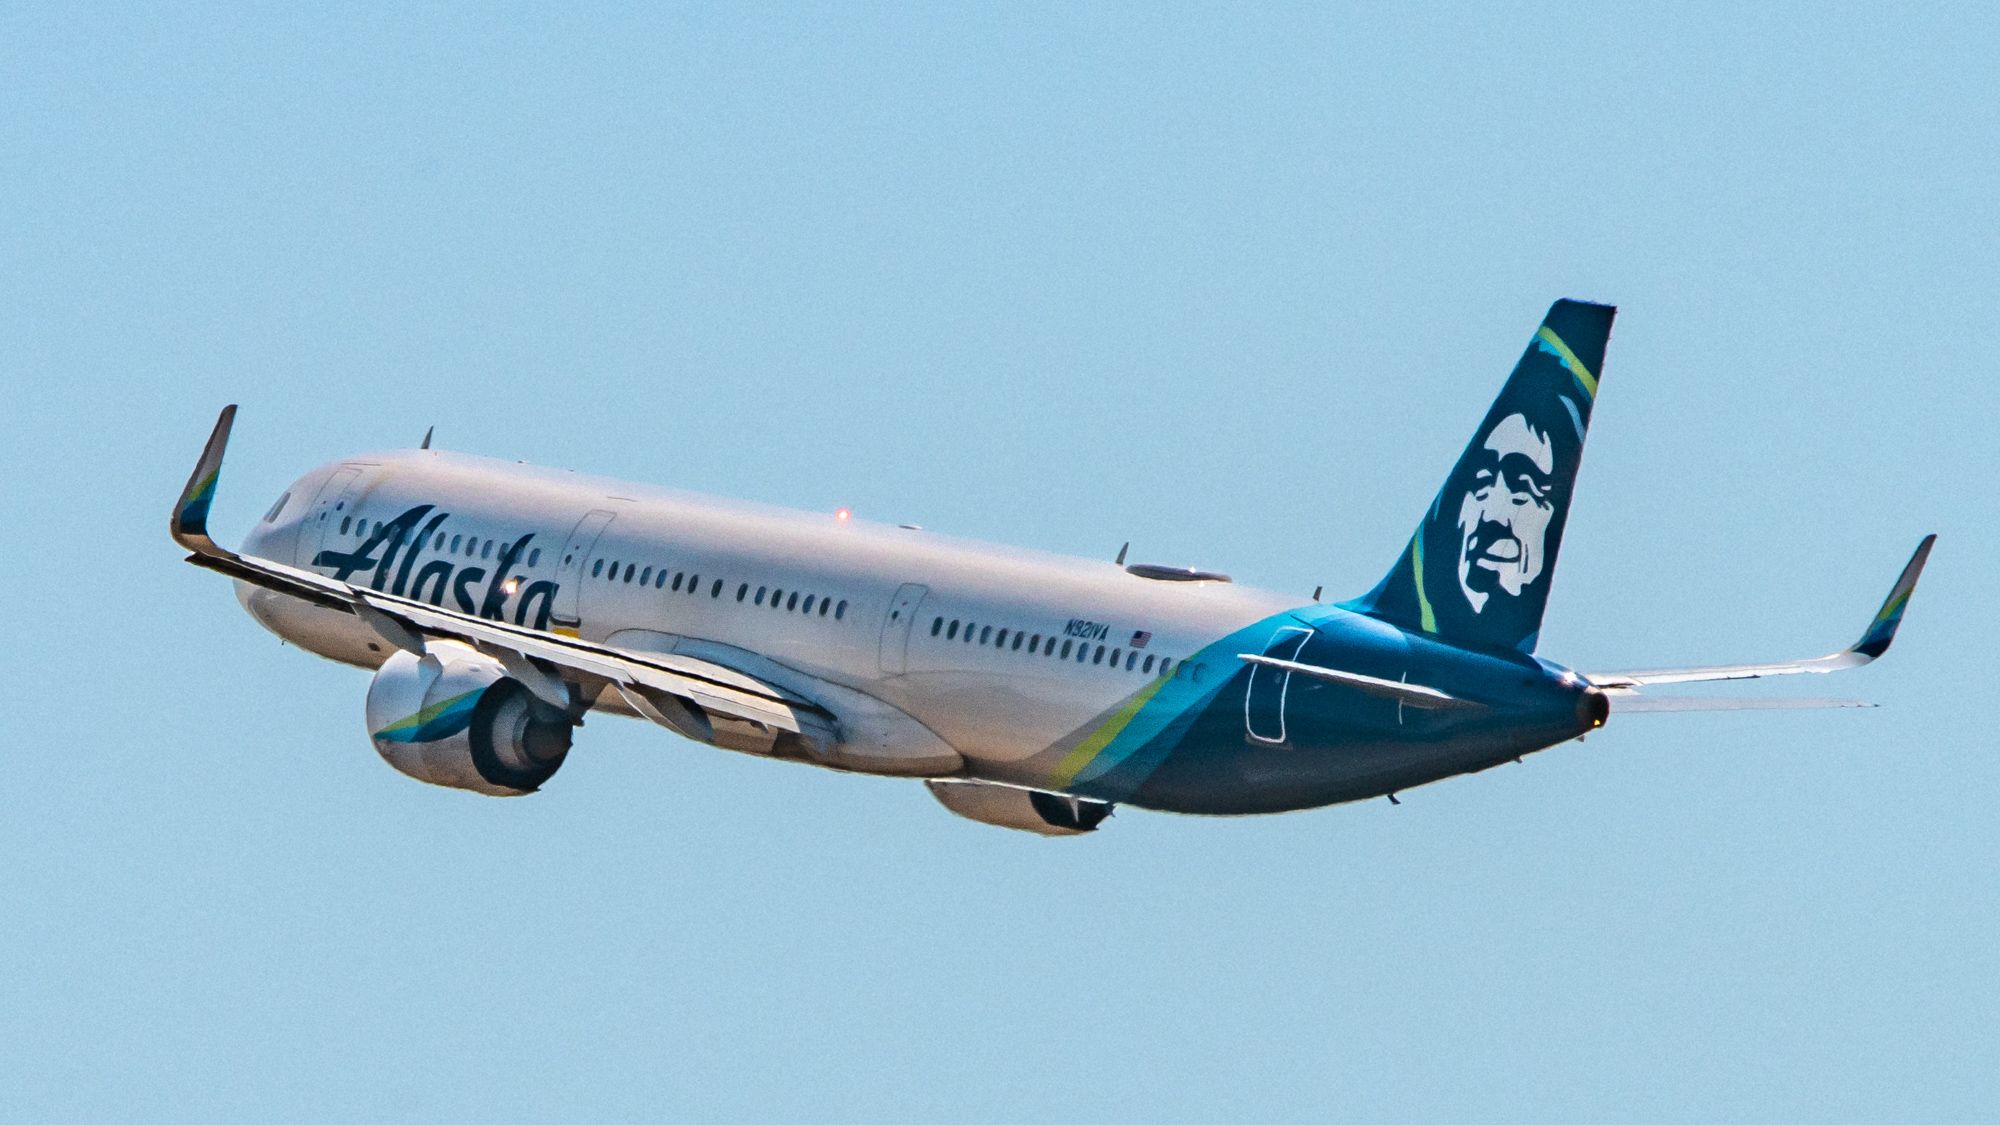 N921VA, an Airbus A321neo, Climbing Away in Alaska Airlines Livery